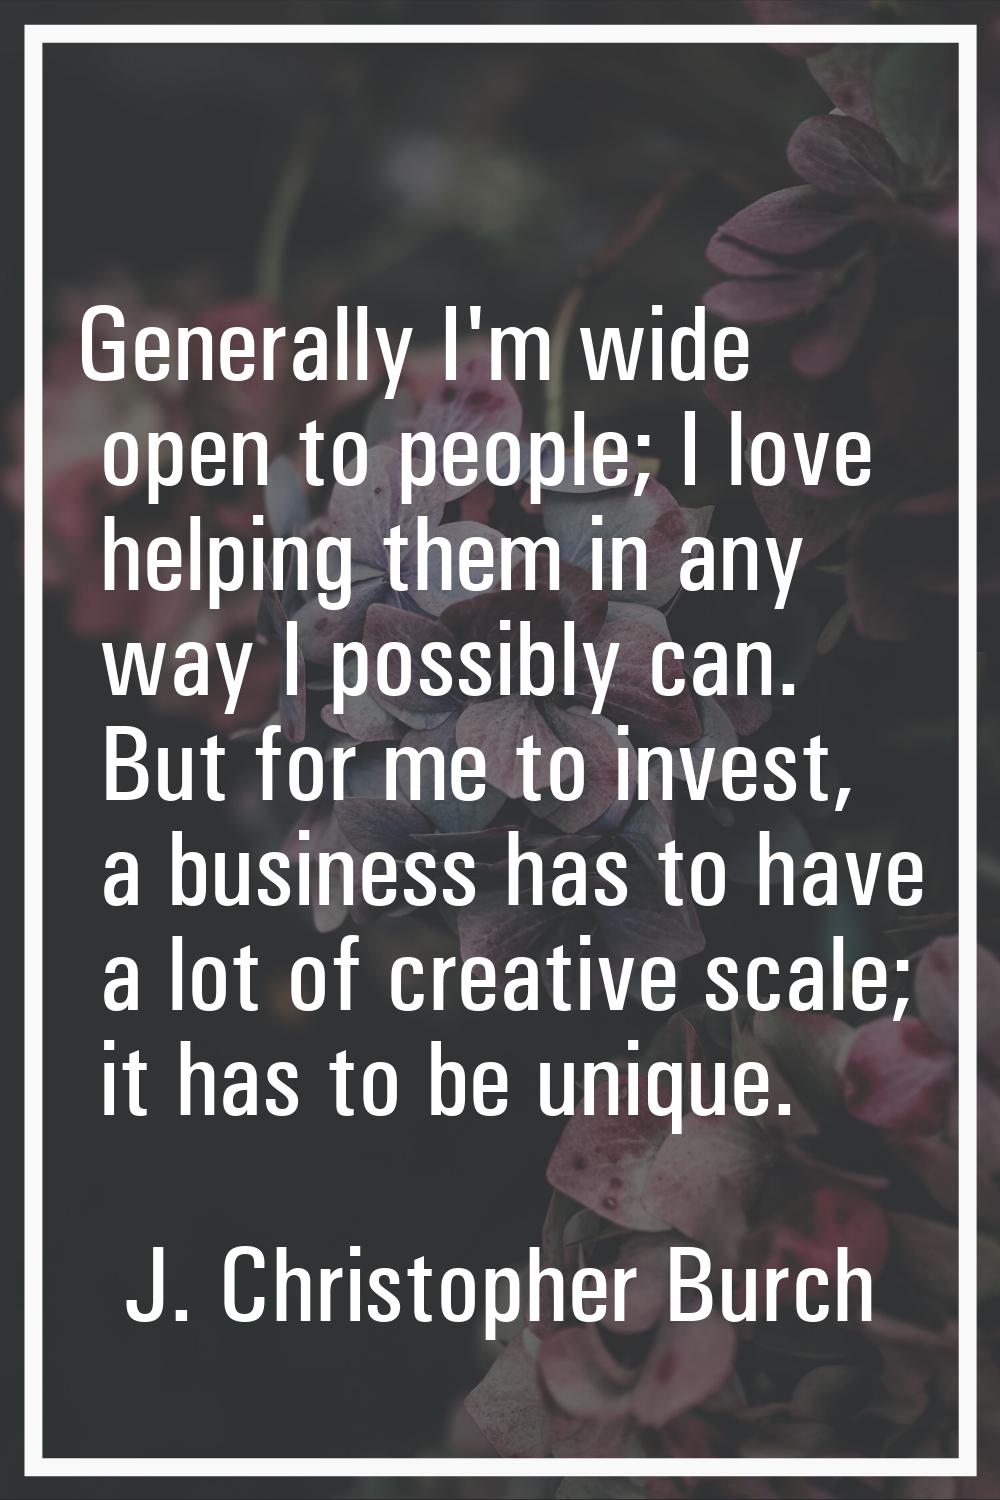 Generally I'm wide open to people; I love helping them in any way I possibly can. But for me to inv